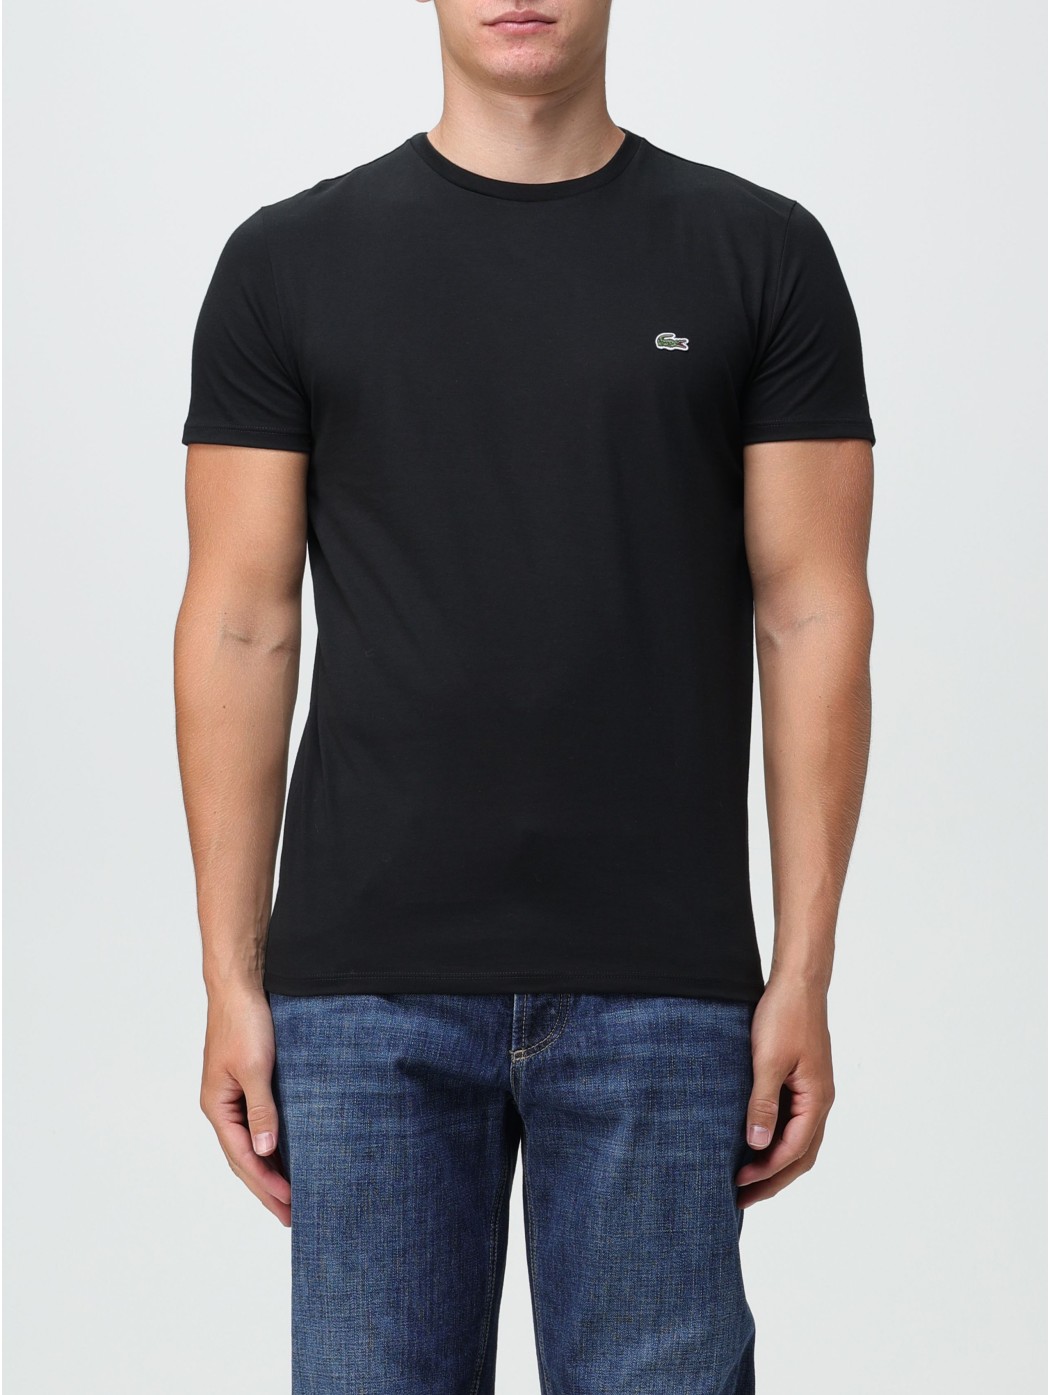 T-SHIRT LACOSTE TH6709 031